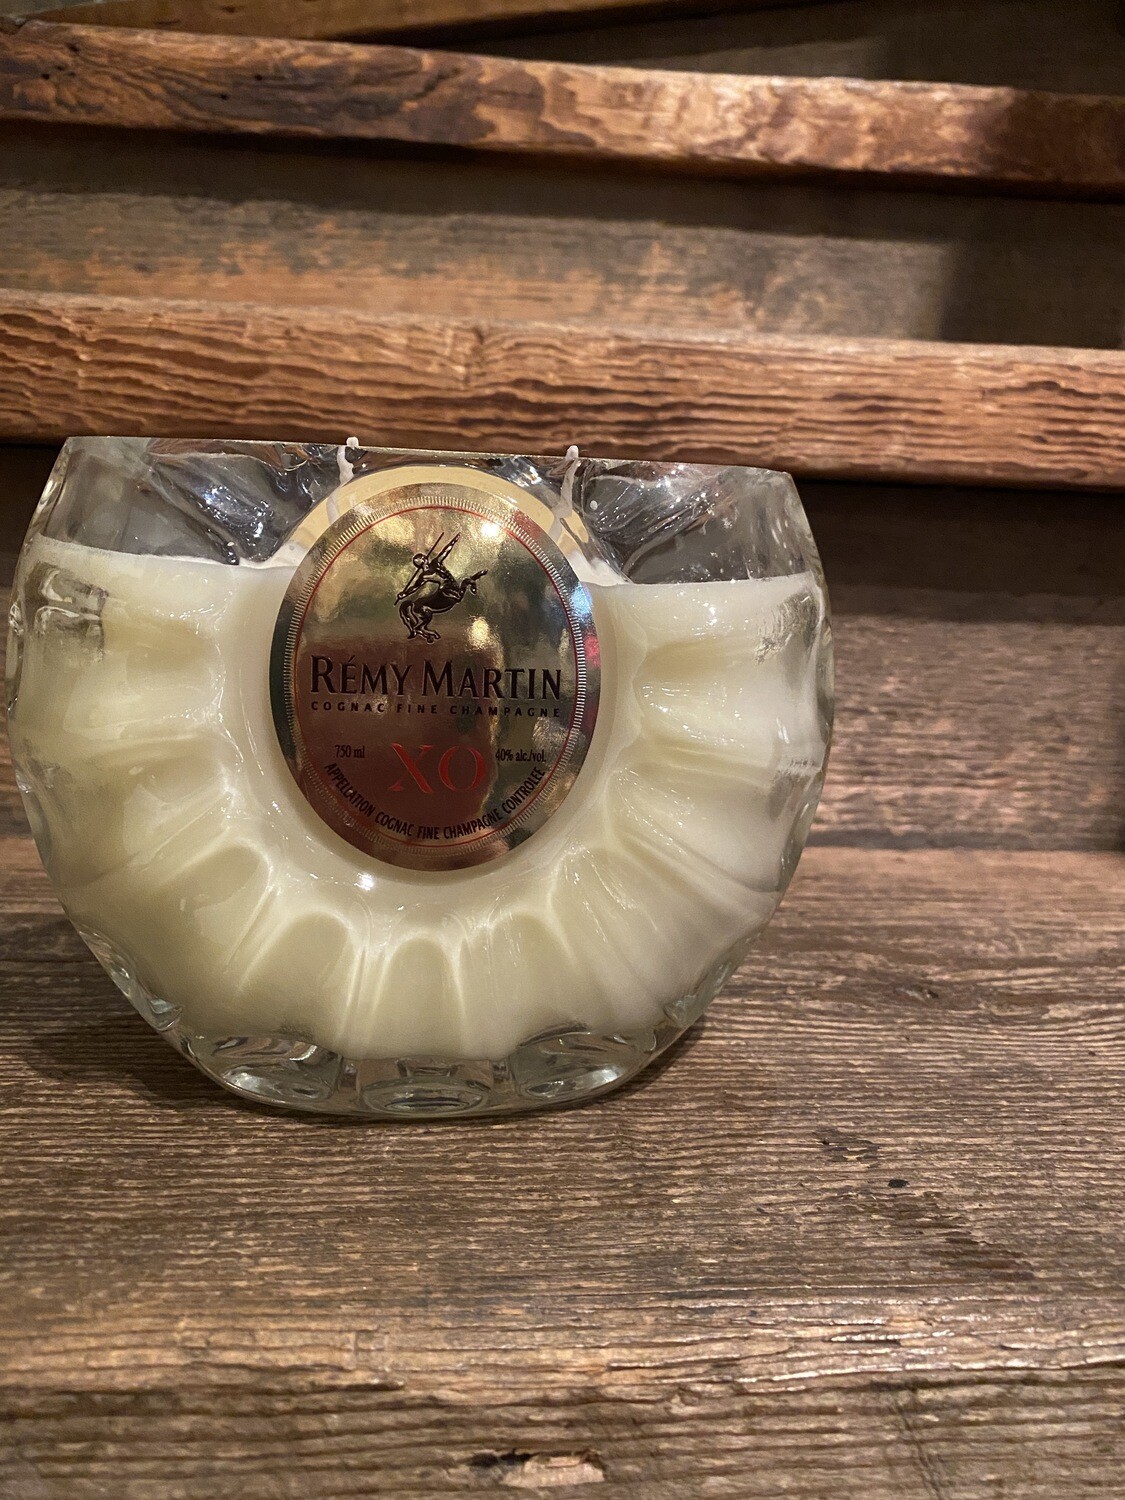 Remy Martin Recycled Bottle Candle